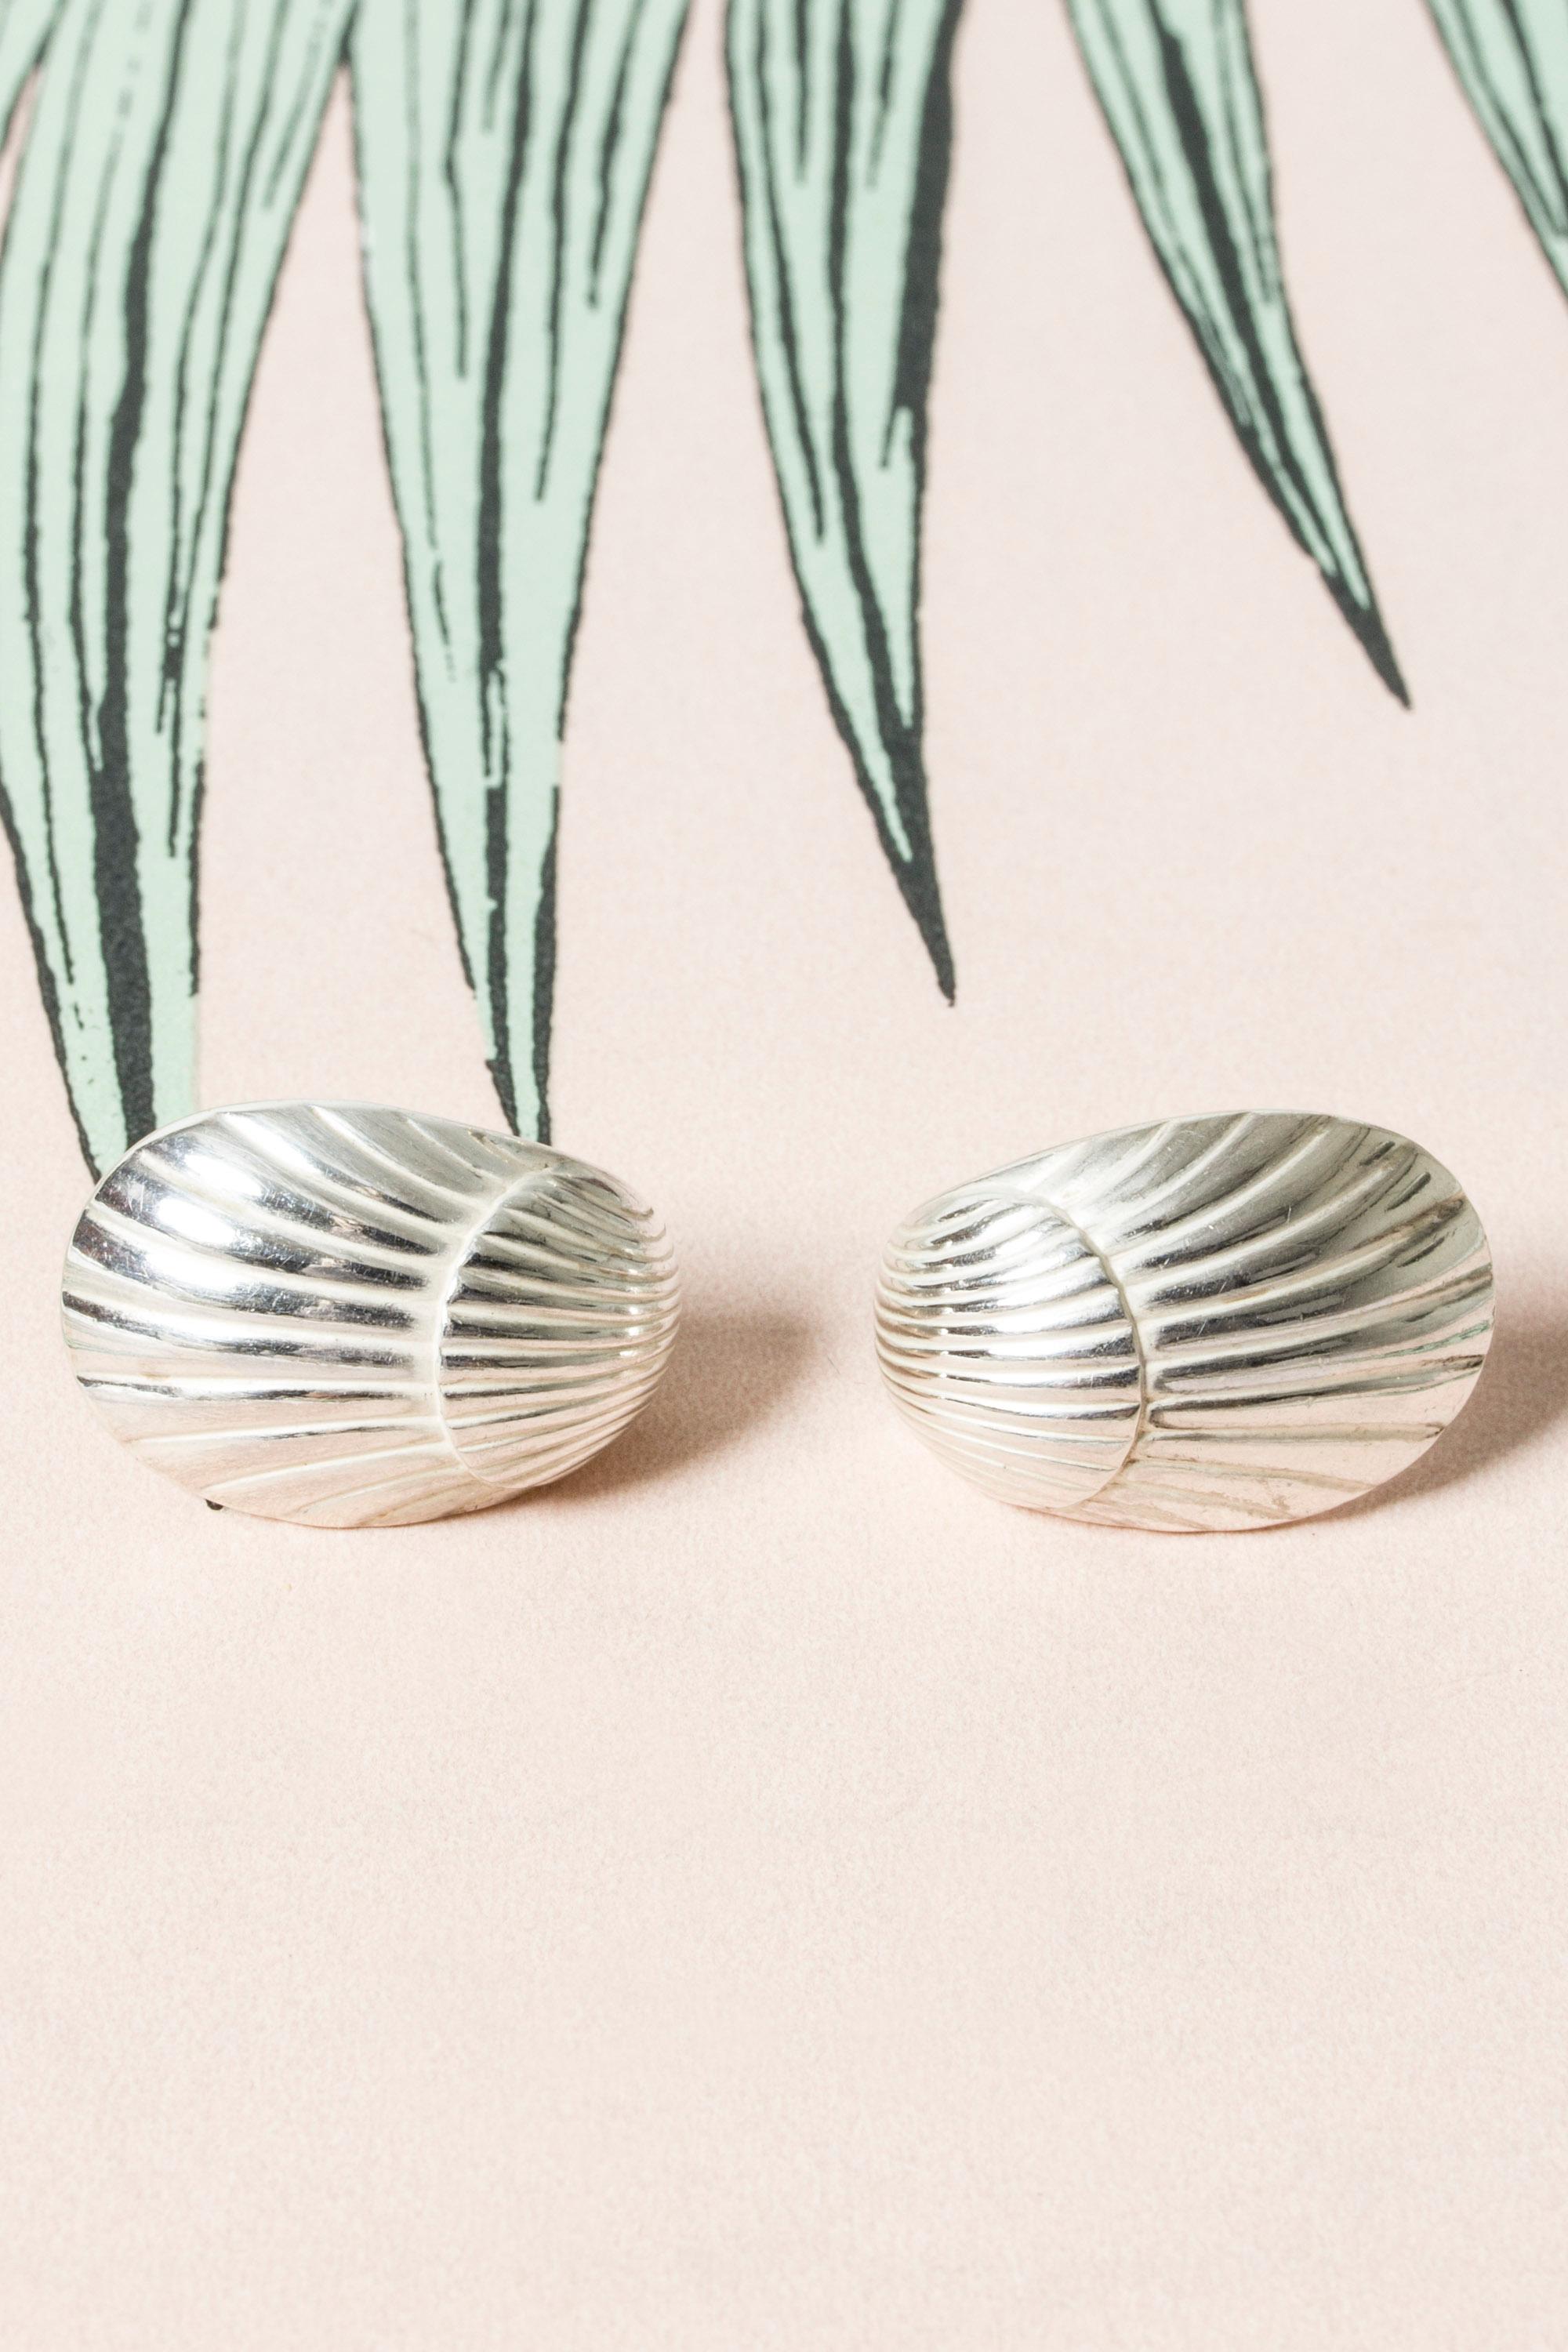 Pair of beautiful silver earrings by Arno Malinowski, in the form of shells. They elegantly curve around the earlobes.